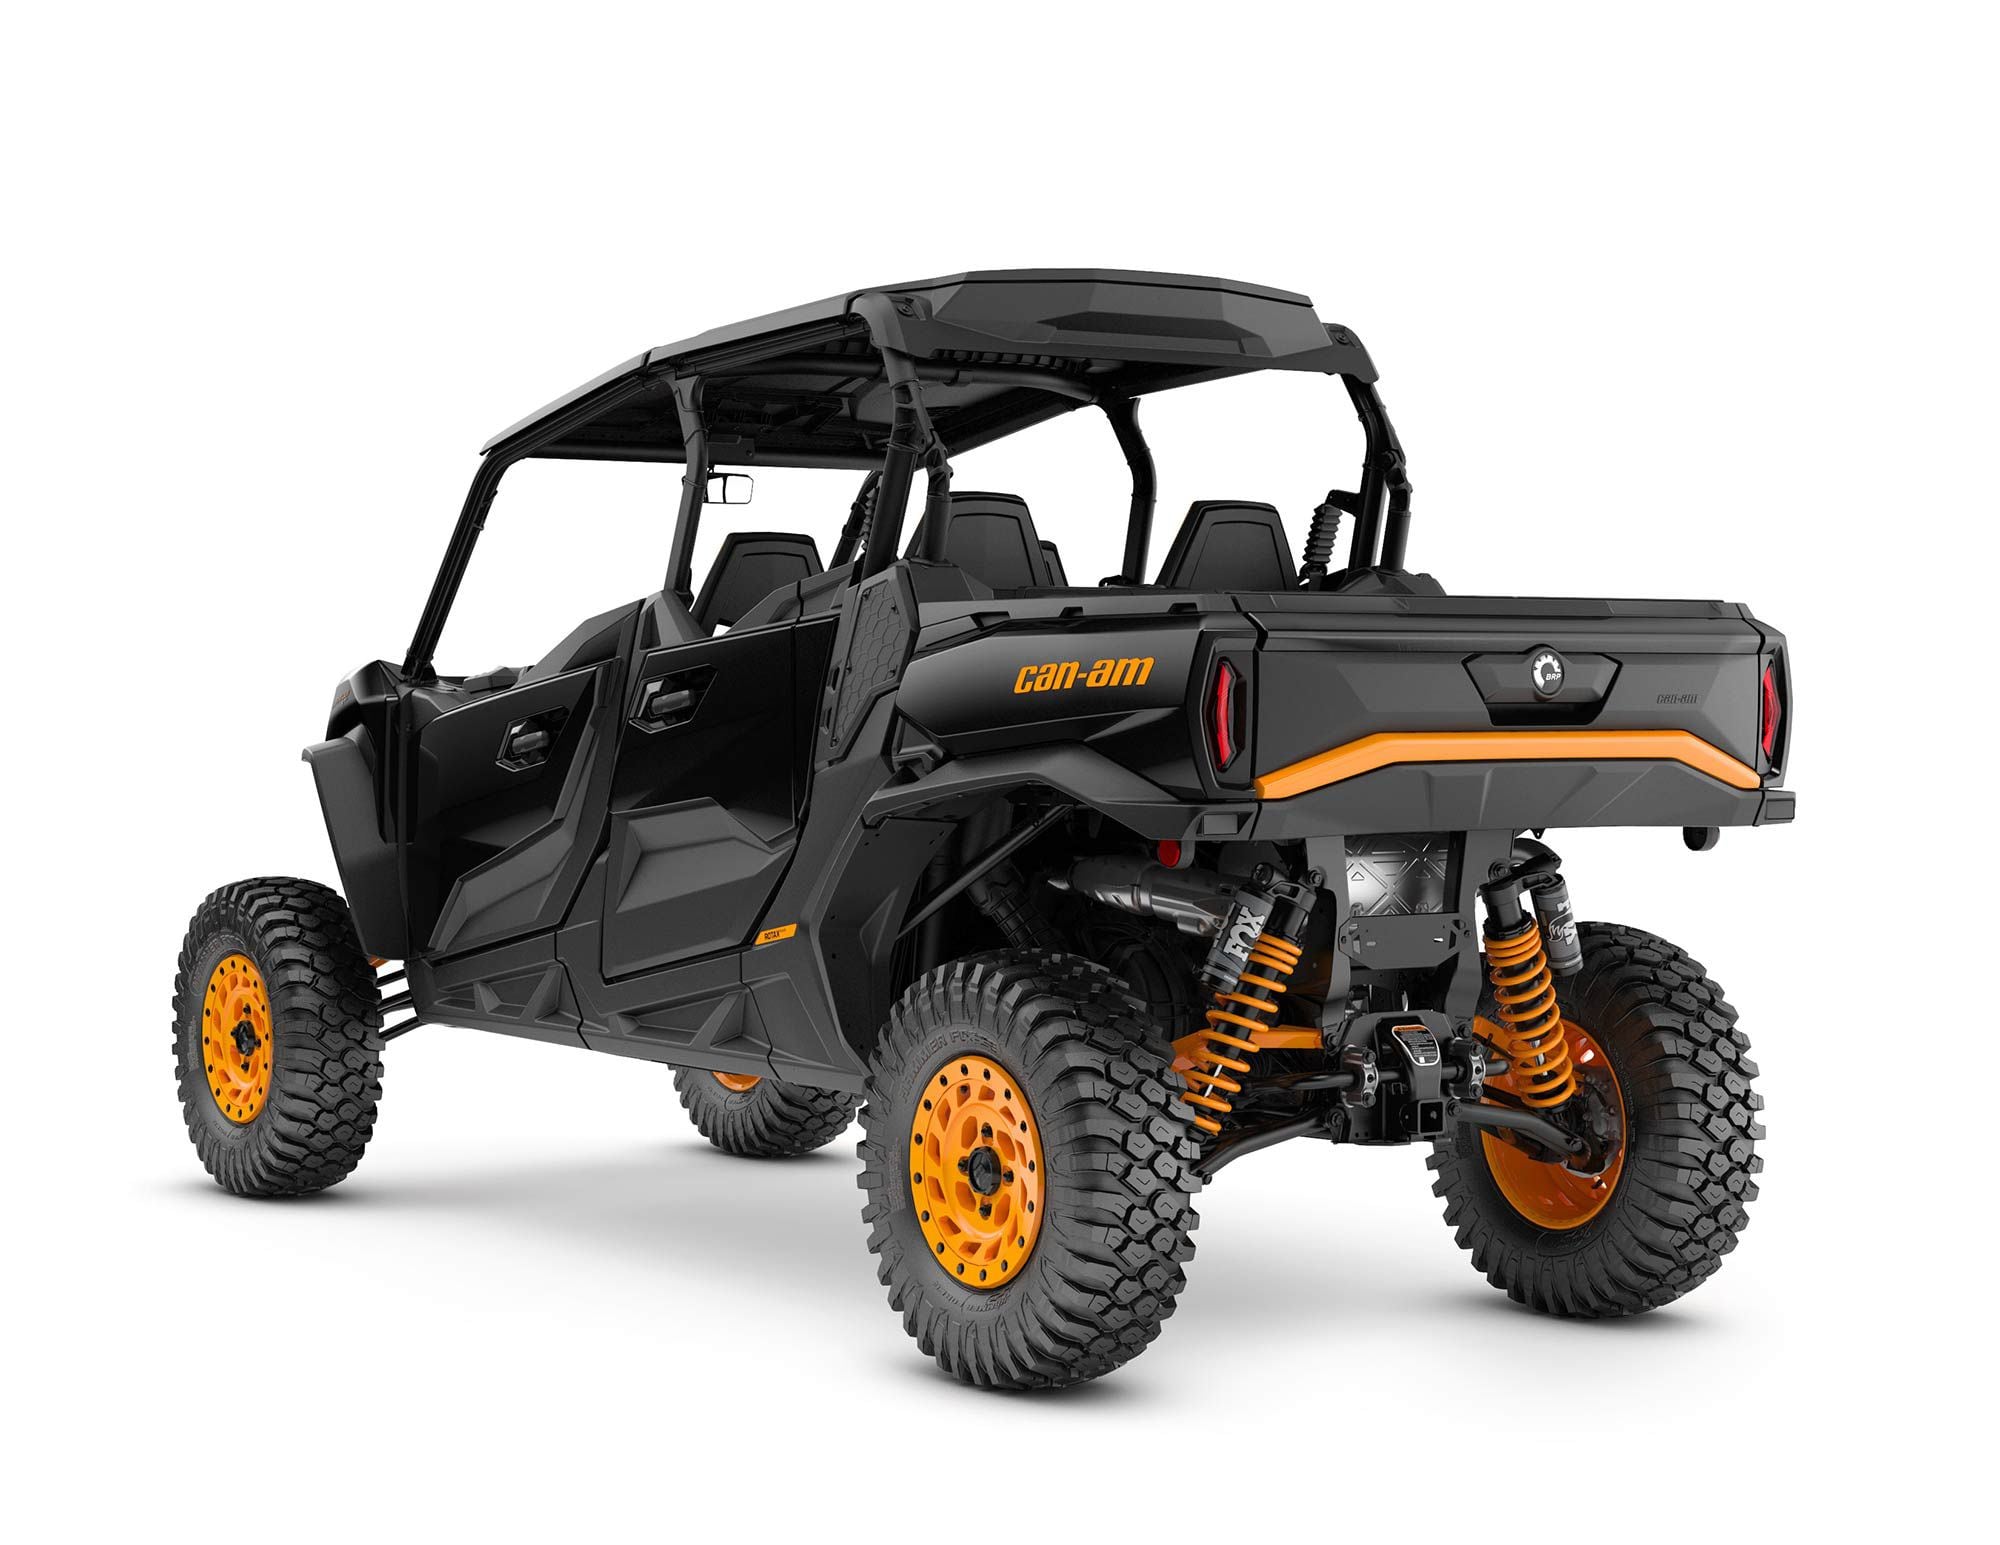 Both the XT and the XT-P are available in four-door configuration.